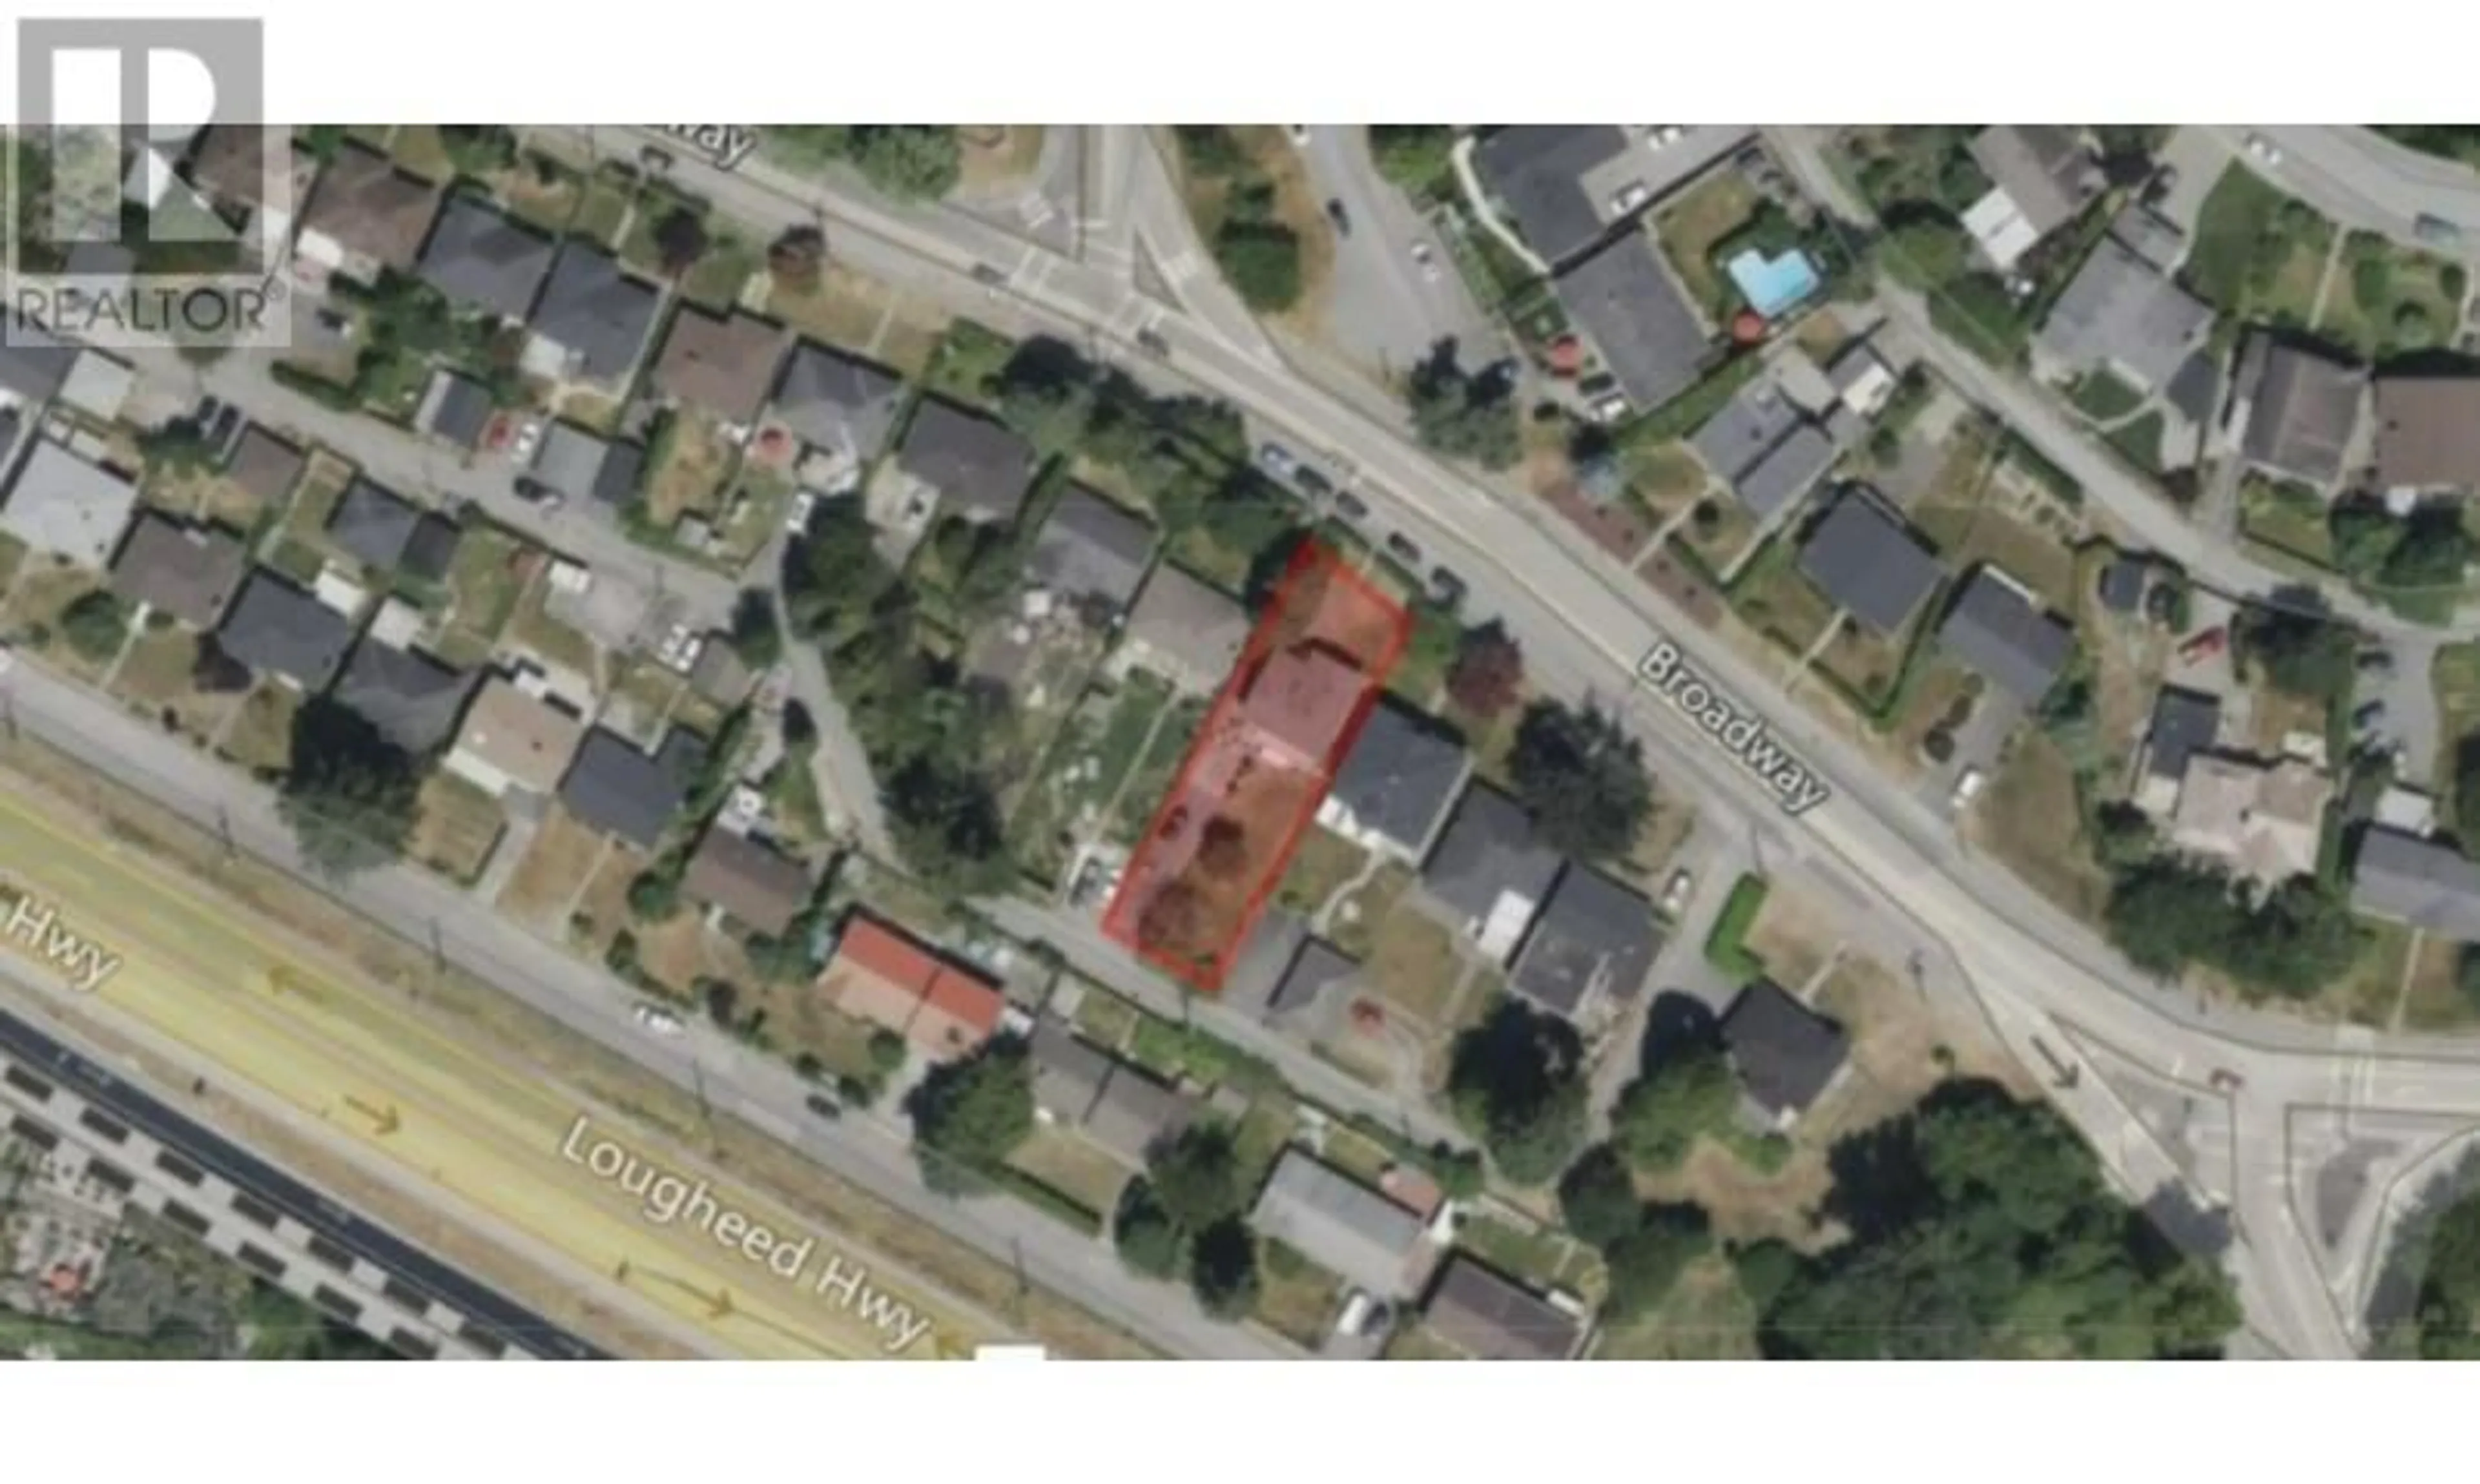 Street view for 6514 BROADWAY, Burnaby British Columbia V5B2Y5